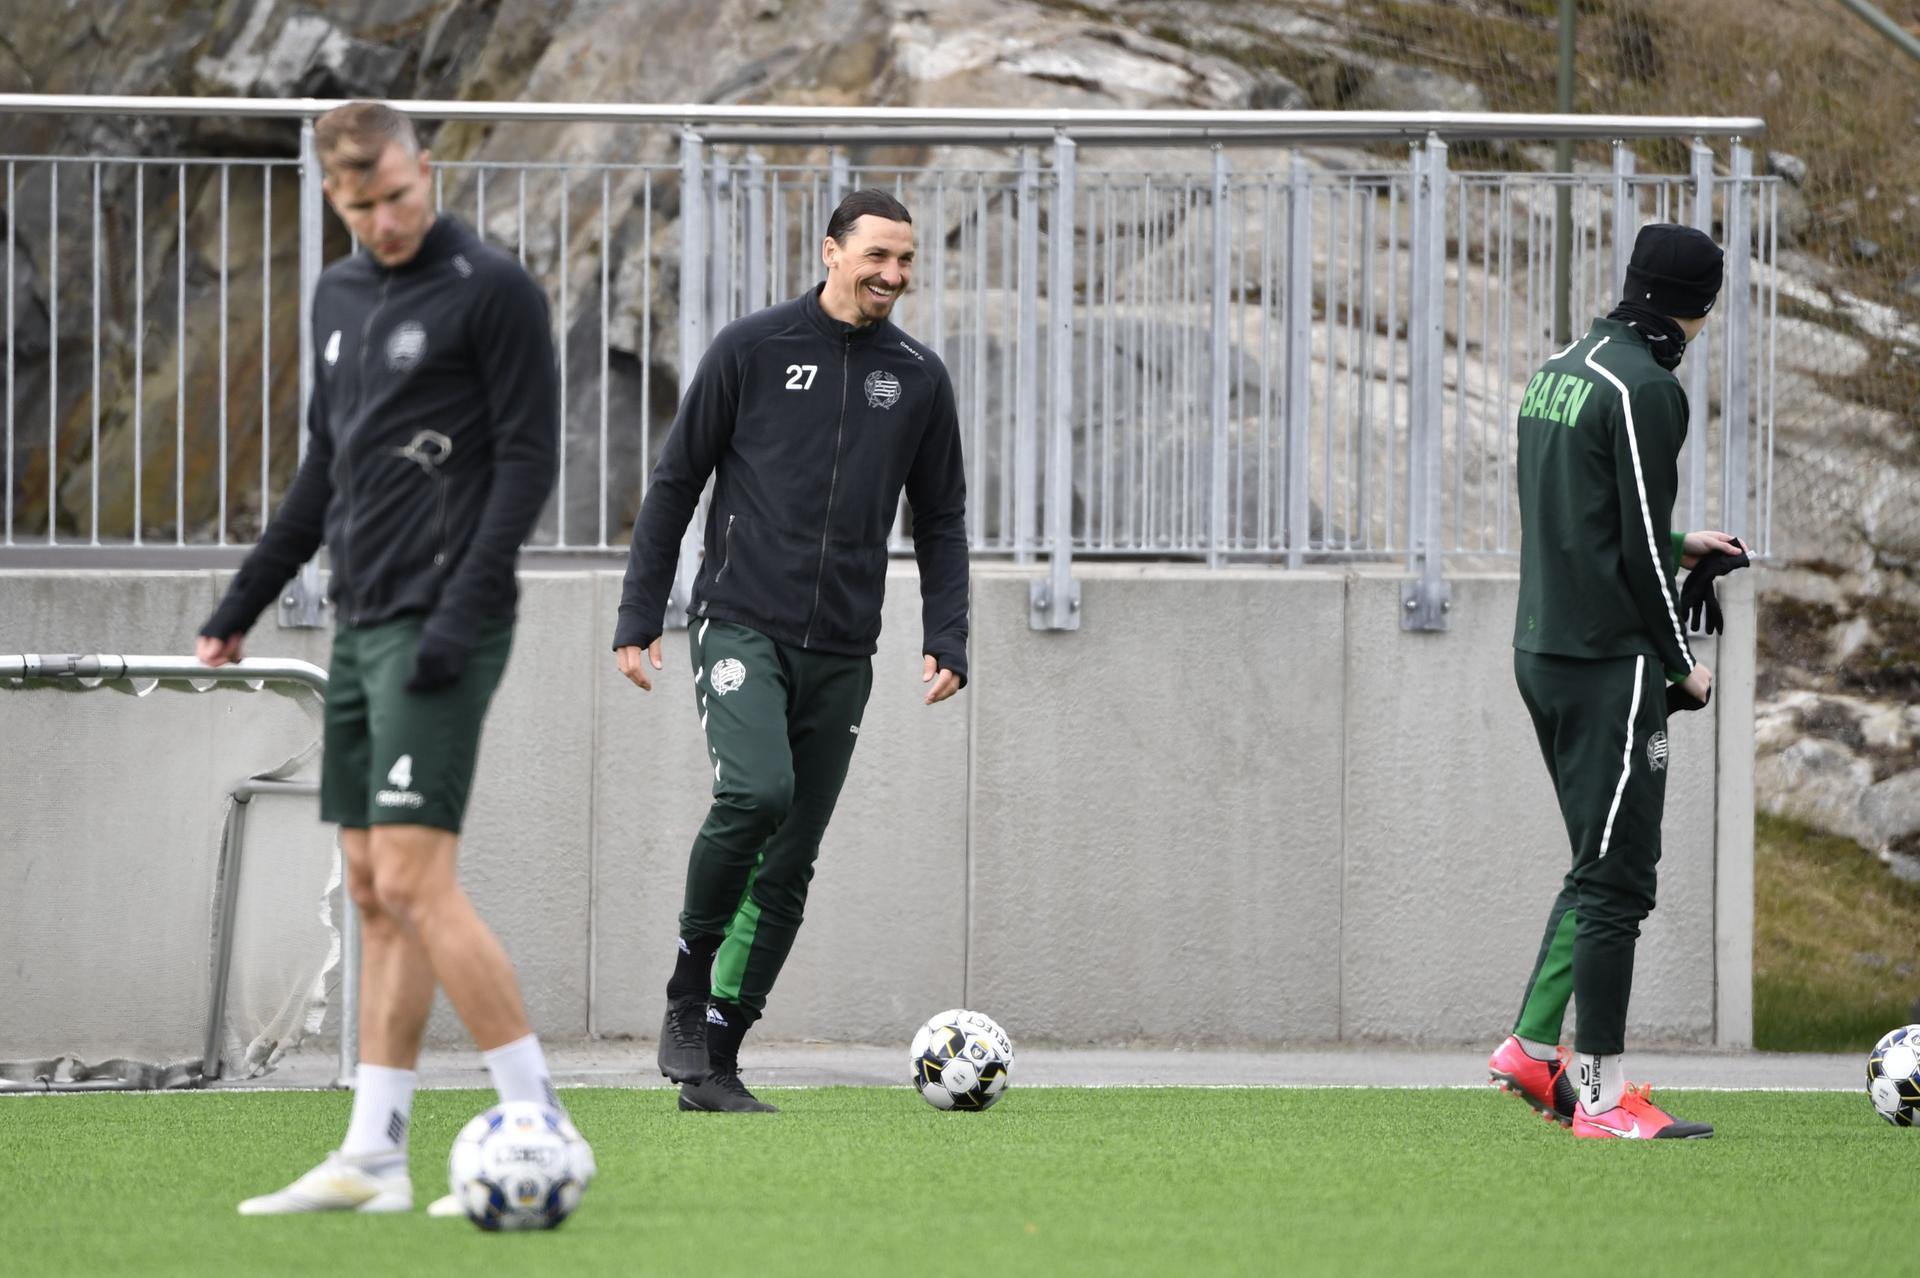 Ibra scores for his part-owned club Hammarby in friendly during